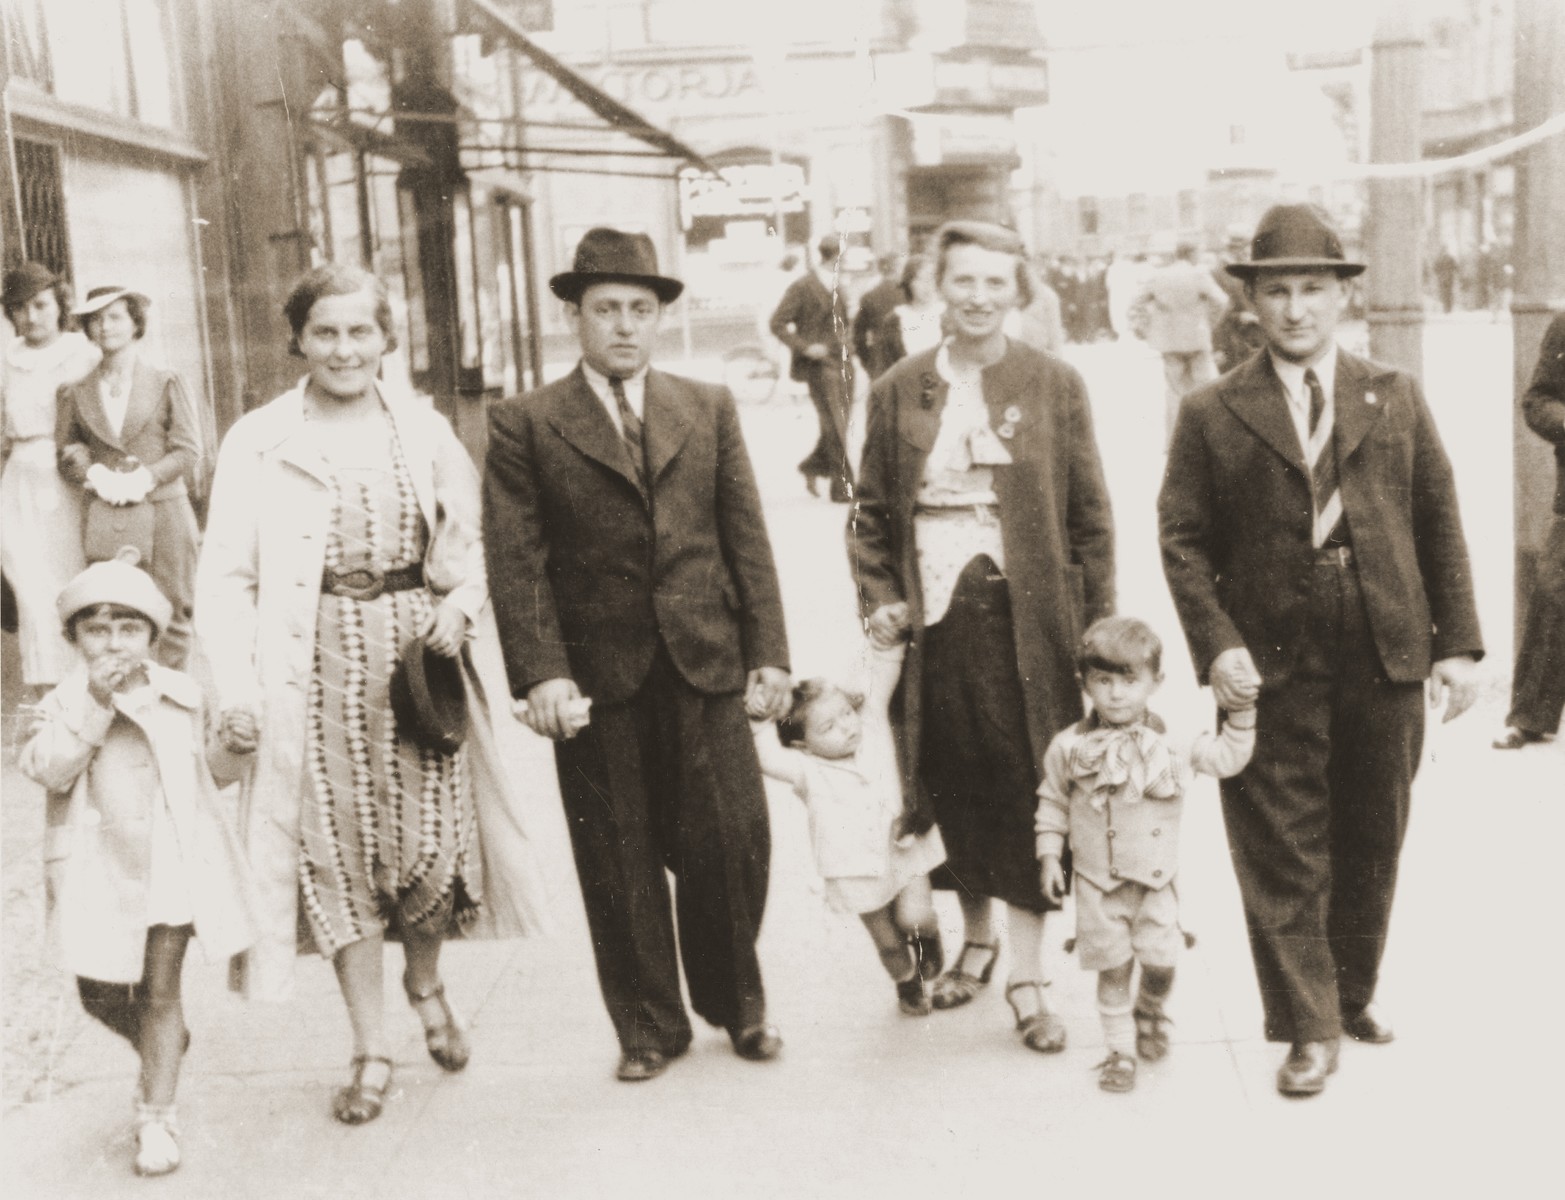 The Goldblum family taking a Sunday stroll on the streets of Katowice.  

Salusia and Tola are holding hands on the left, while Izak and Wolf are on the right.